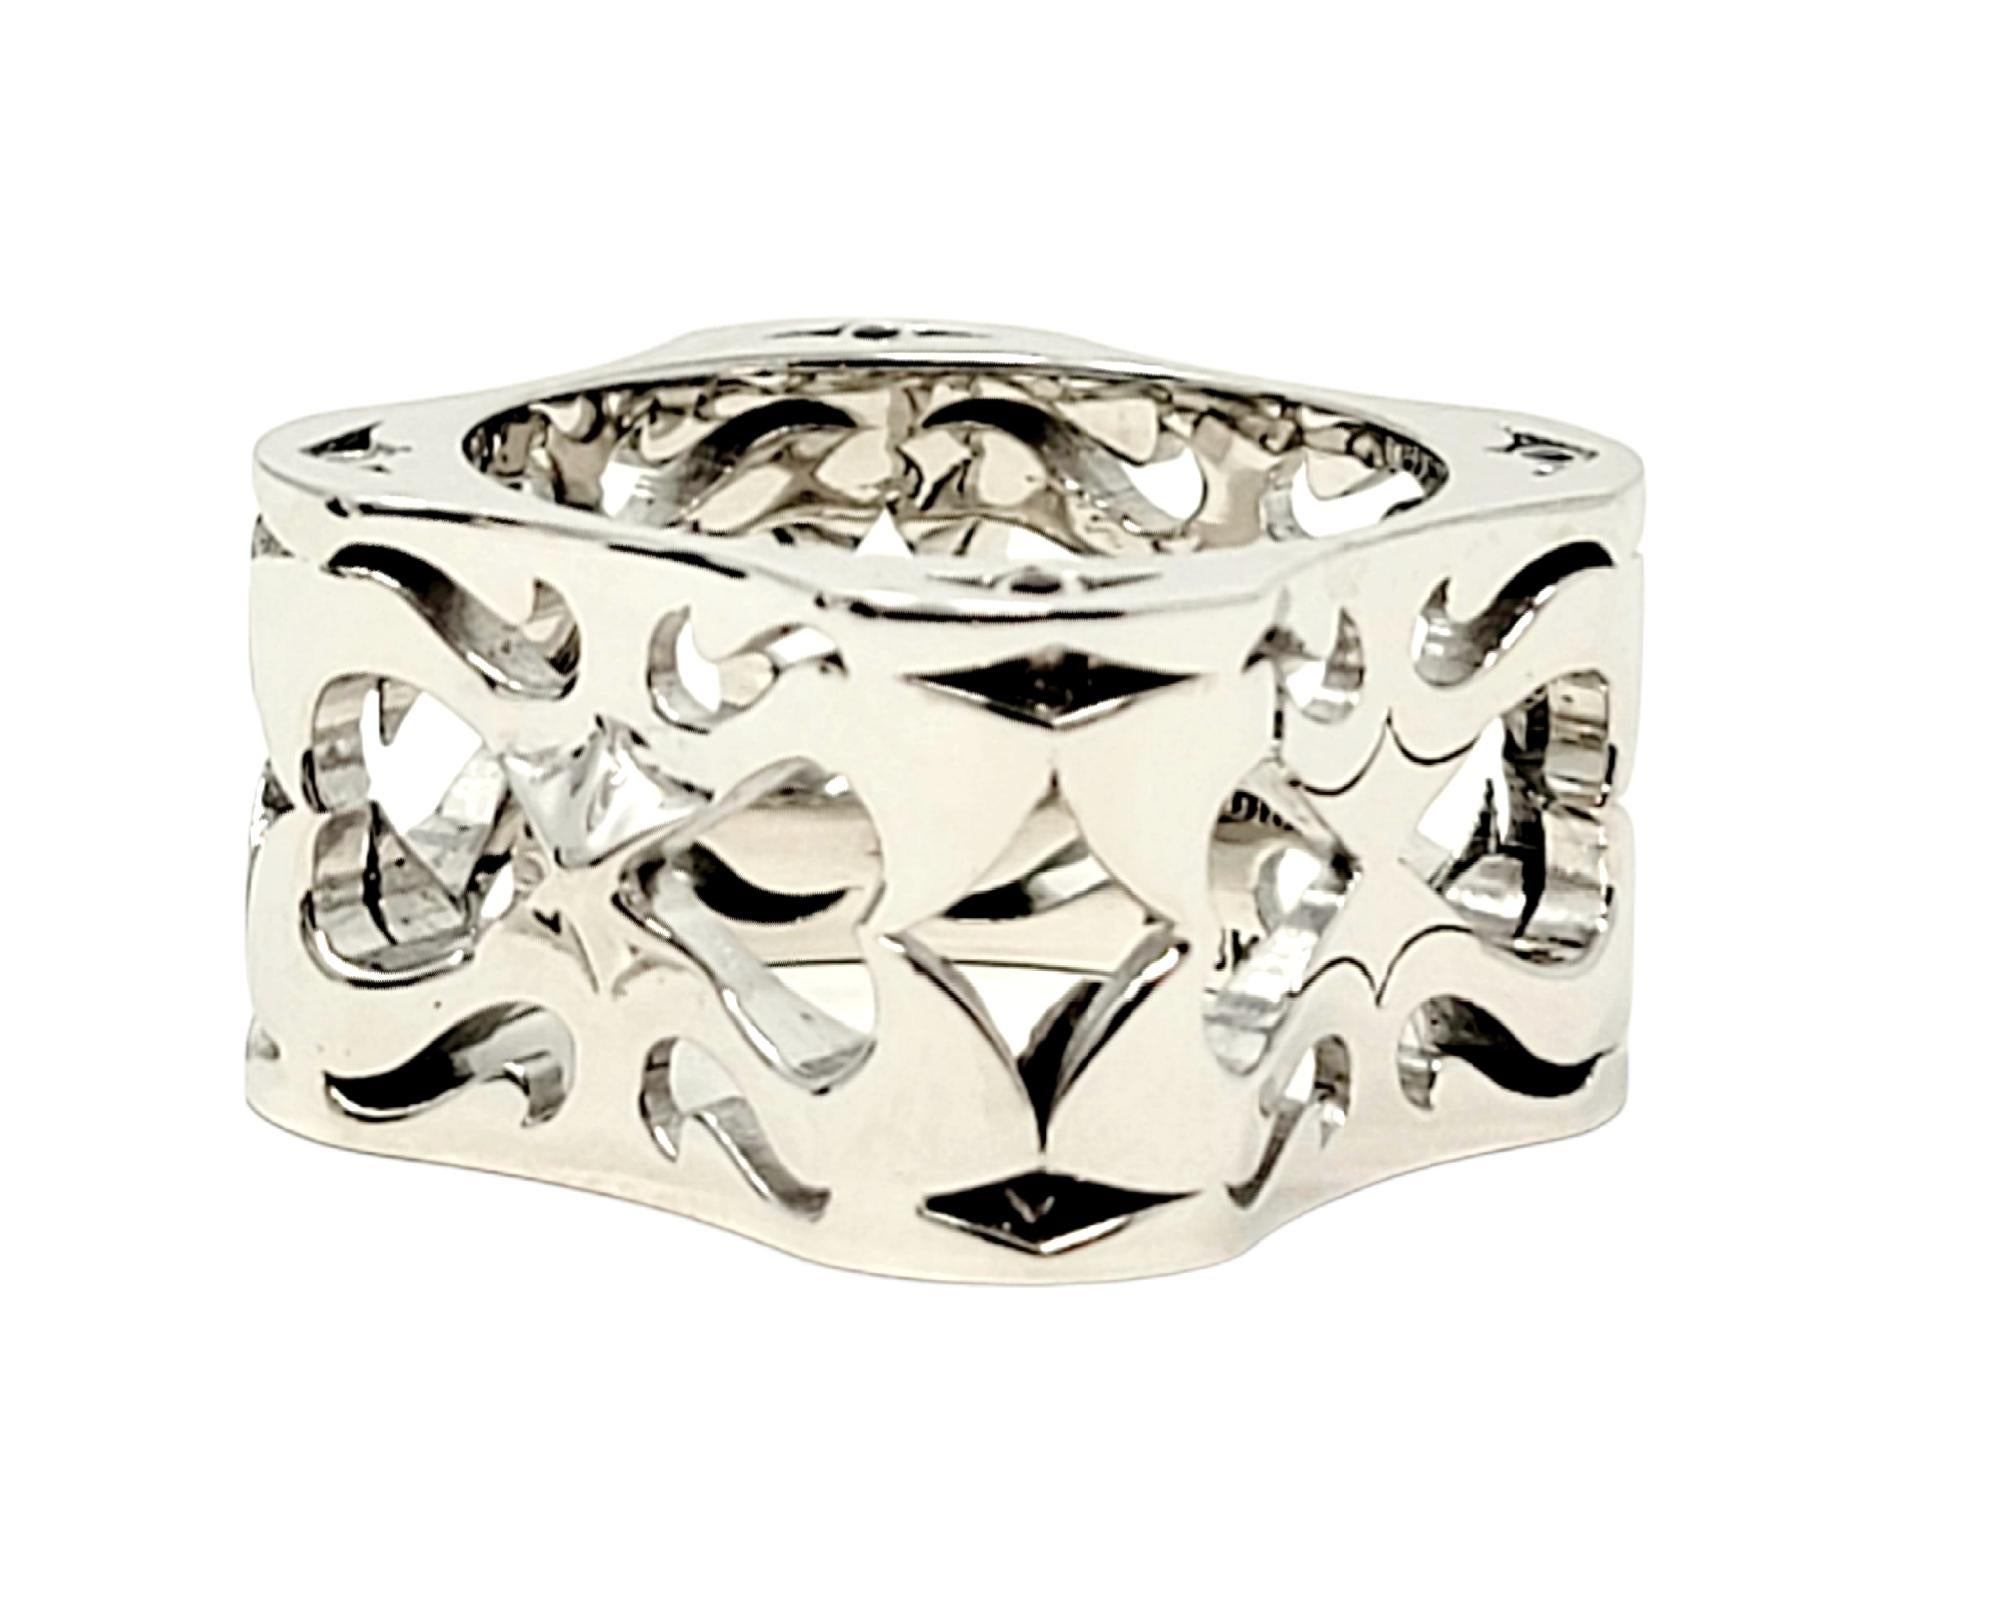 Ring size: 13

Unique unisex band ring from LUZ by Houman. Substantial in both size and design, this bold piece exudes a modern elegance. With its solid white gold design and stunning carved details, this incredible ring is truly a work of art. 